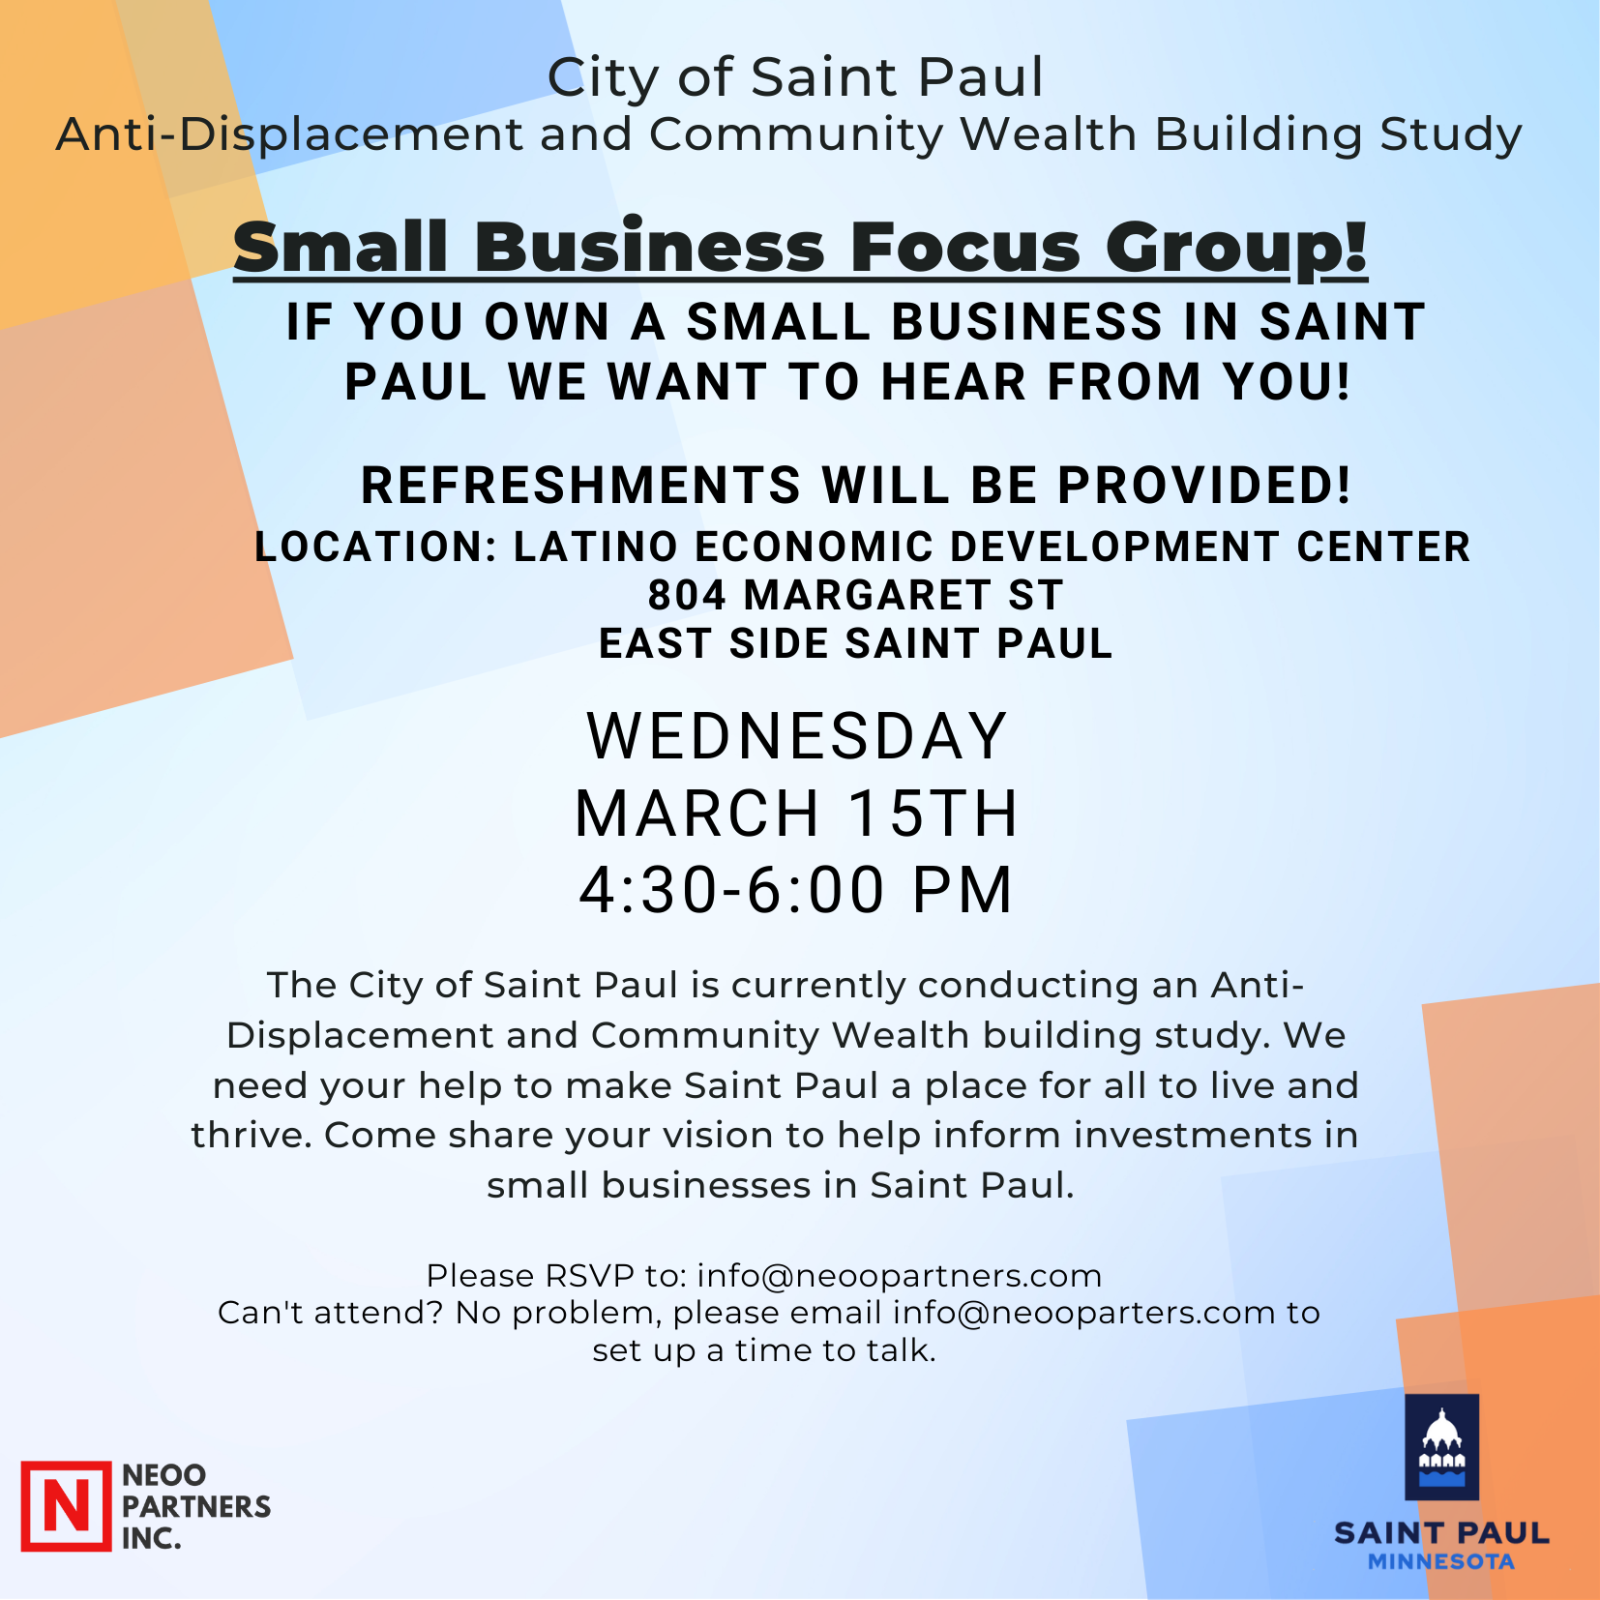 Event Promo Photo For Anti-Displacement and Community Wealth Building: Small Business Focus Group